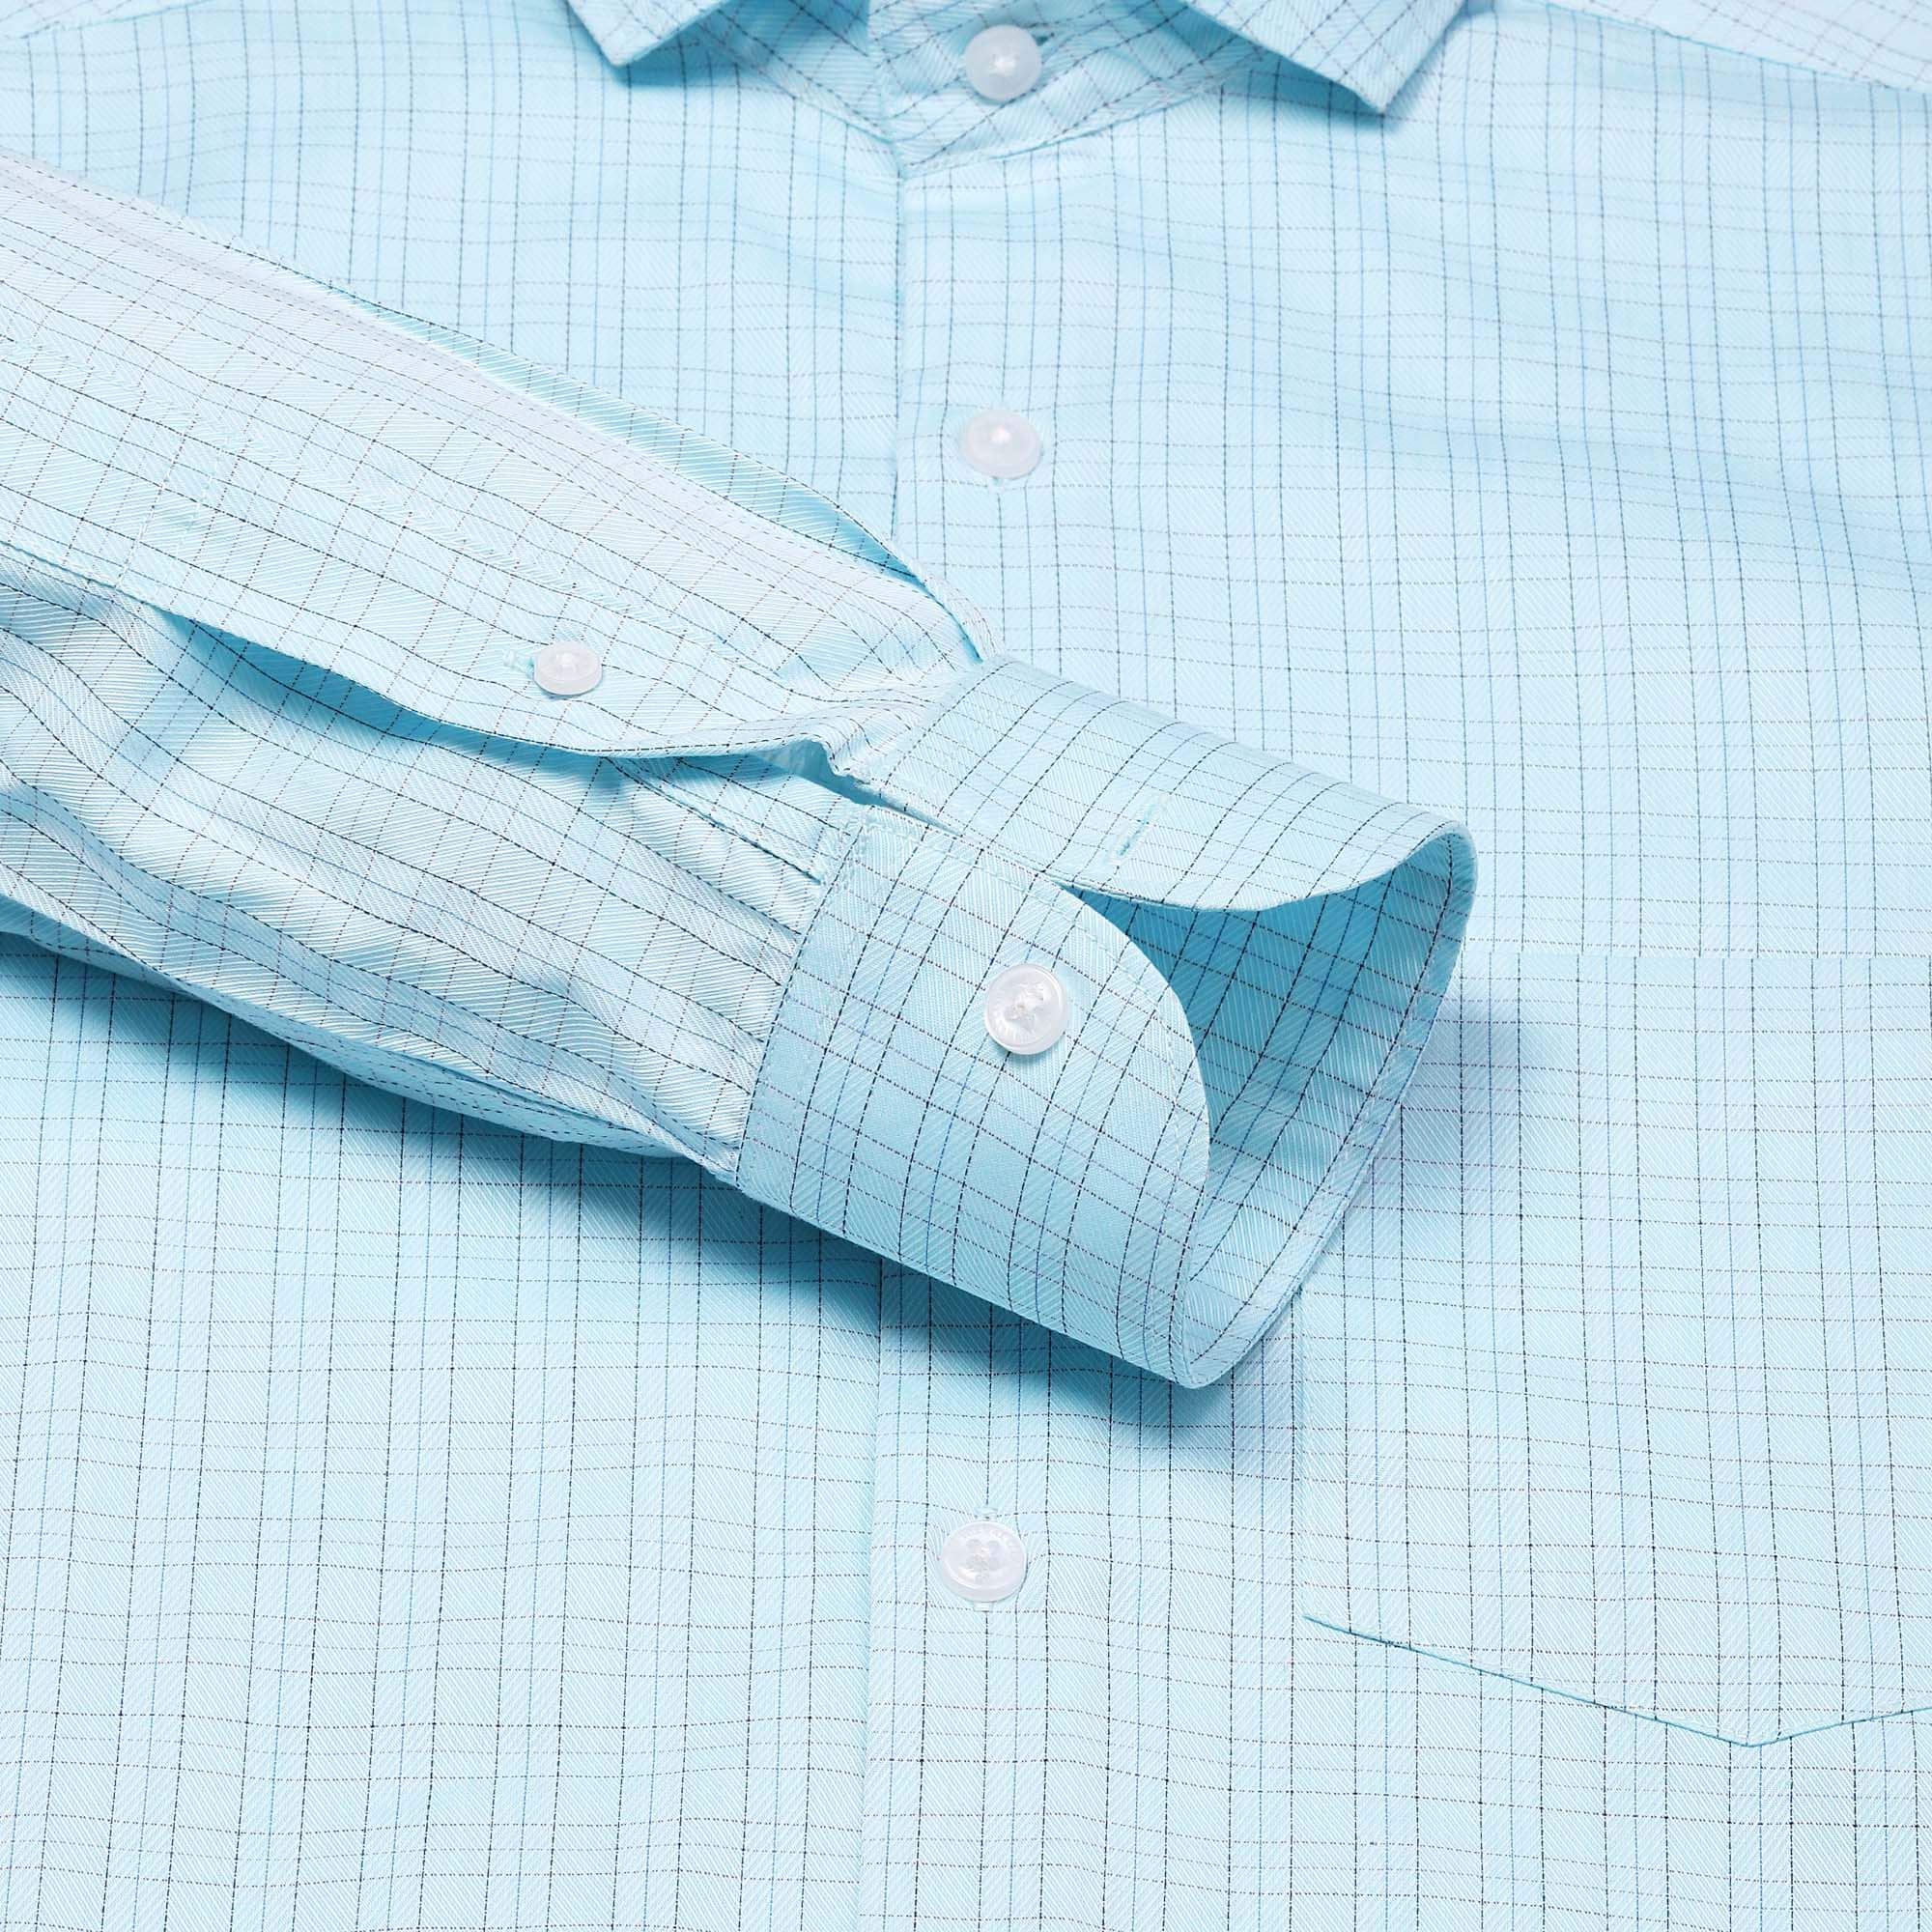 Eclipse Twill Dobby Check Shirt In Turquoise Slim Fit - The Formal Club